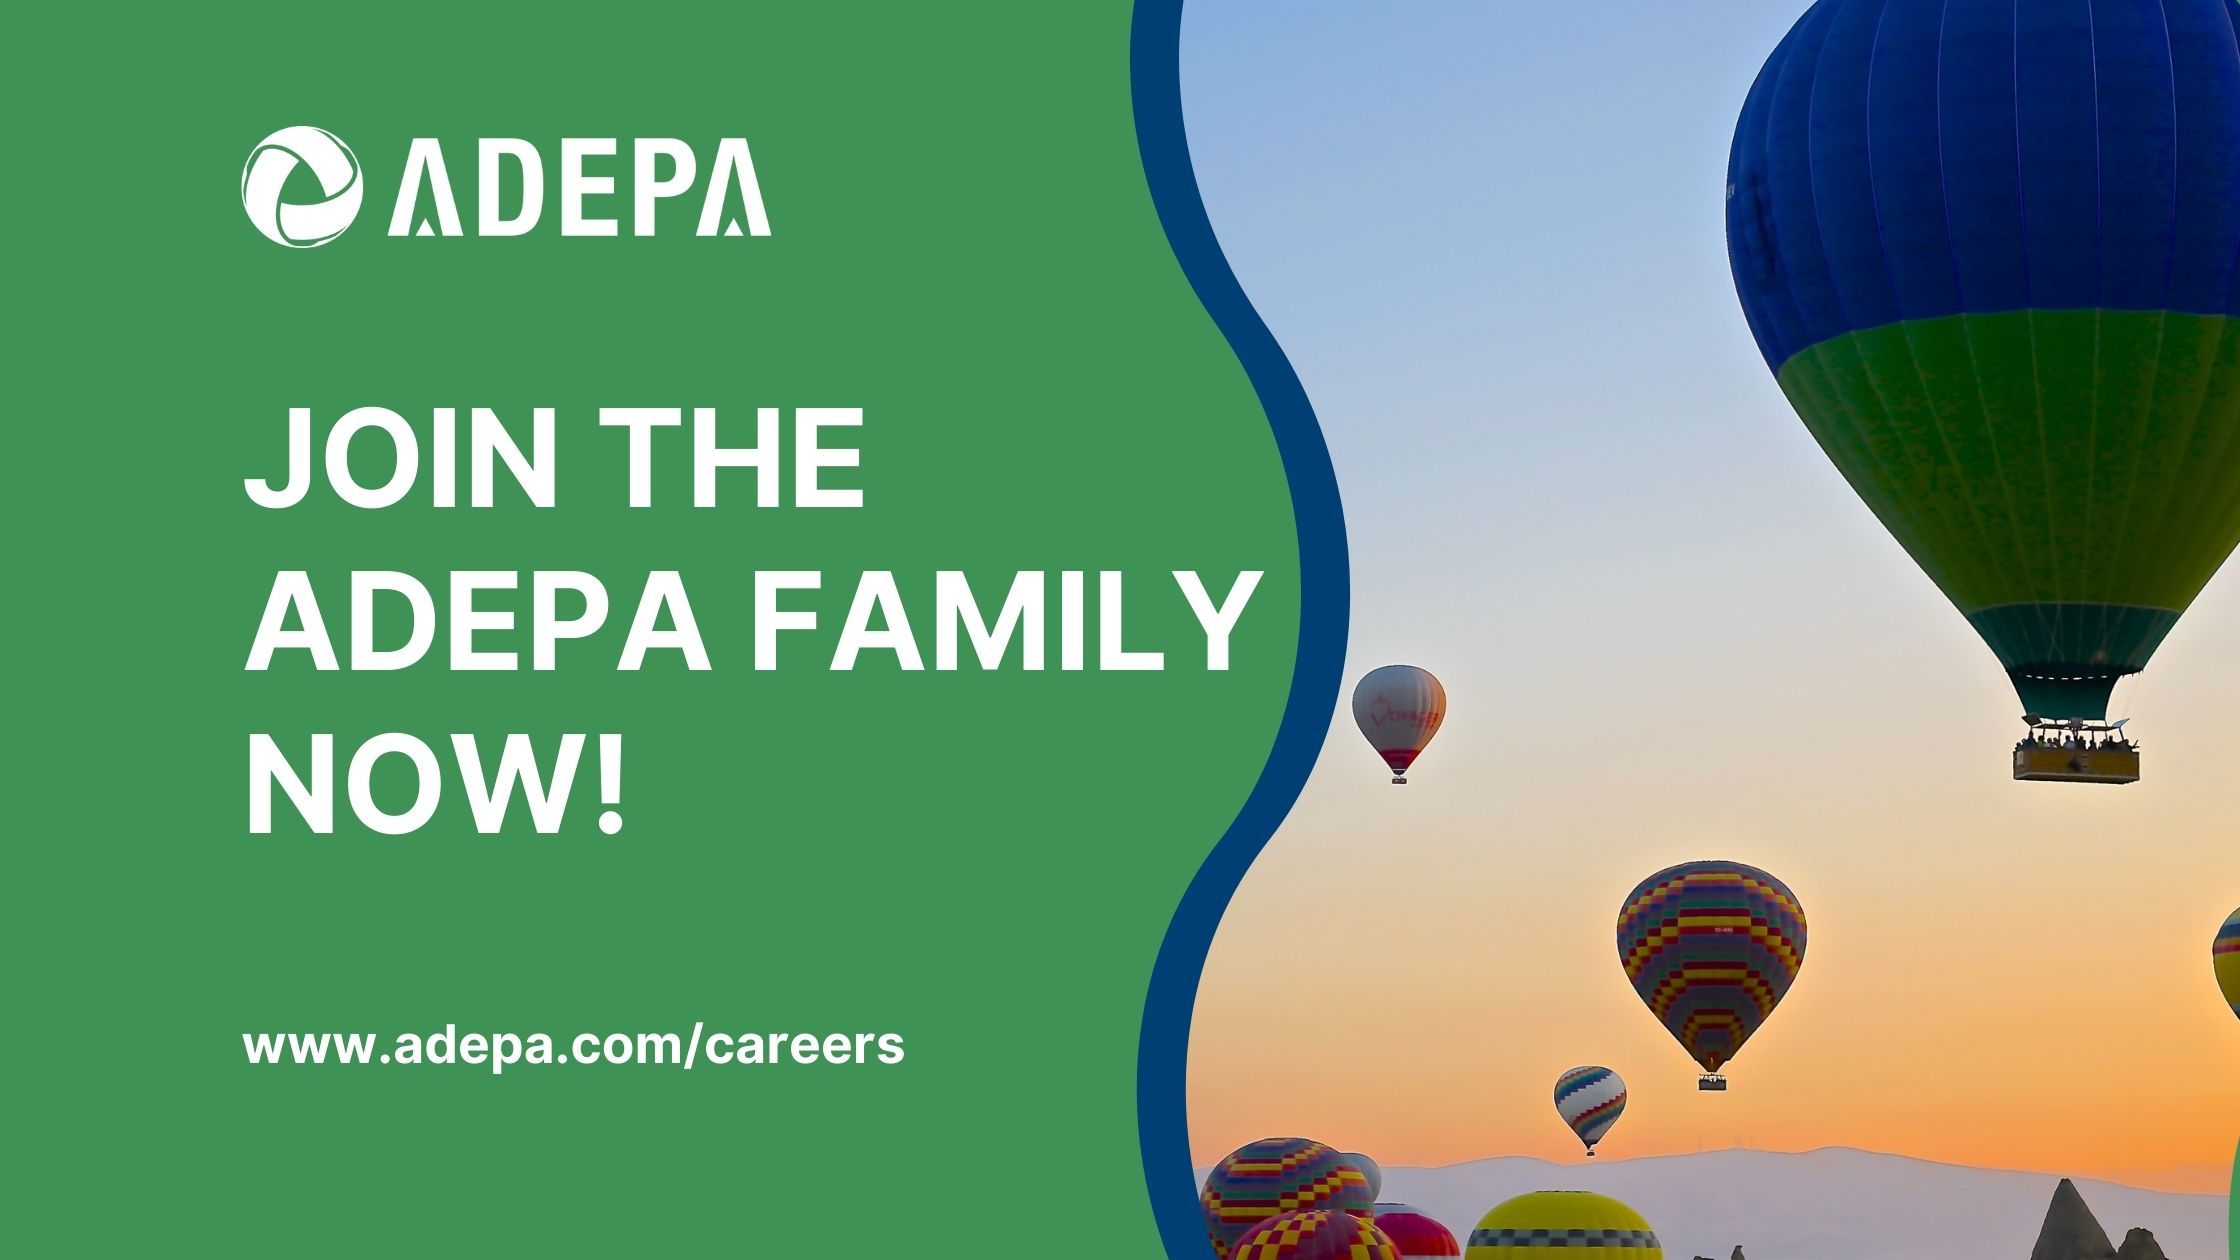 Join the Adepa Family now. Go to www.adepa.com/careers to see all open positions